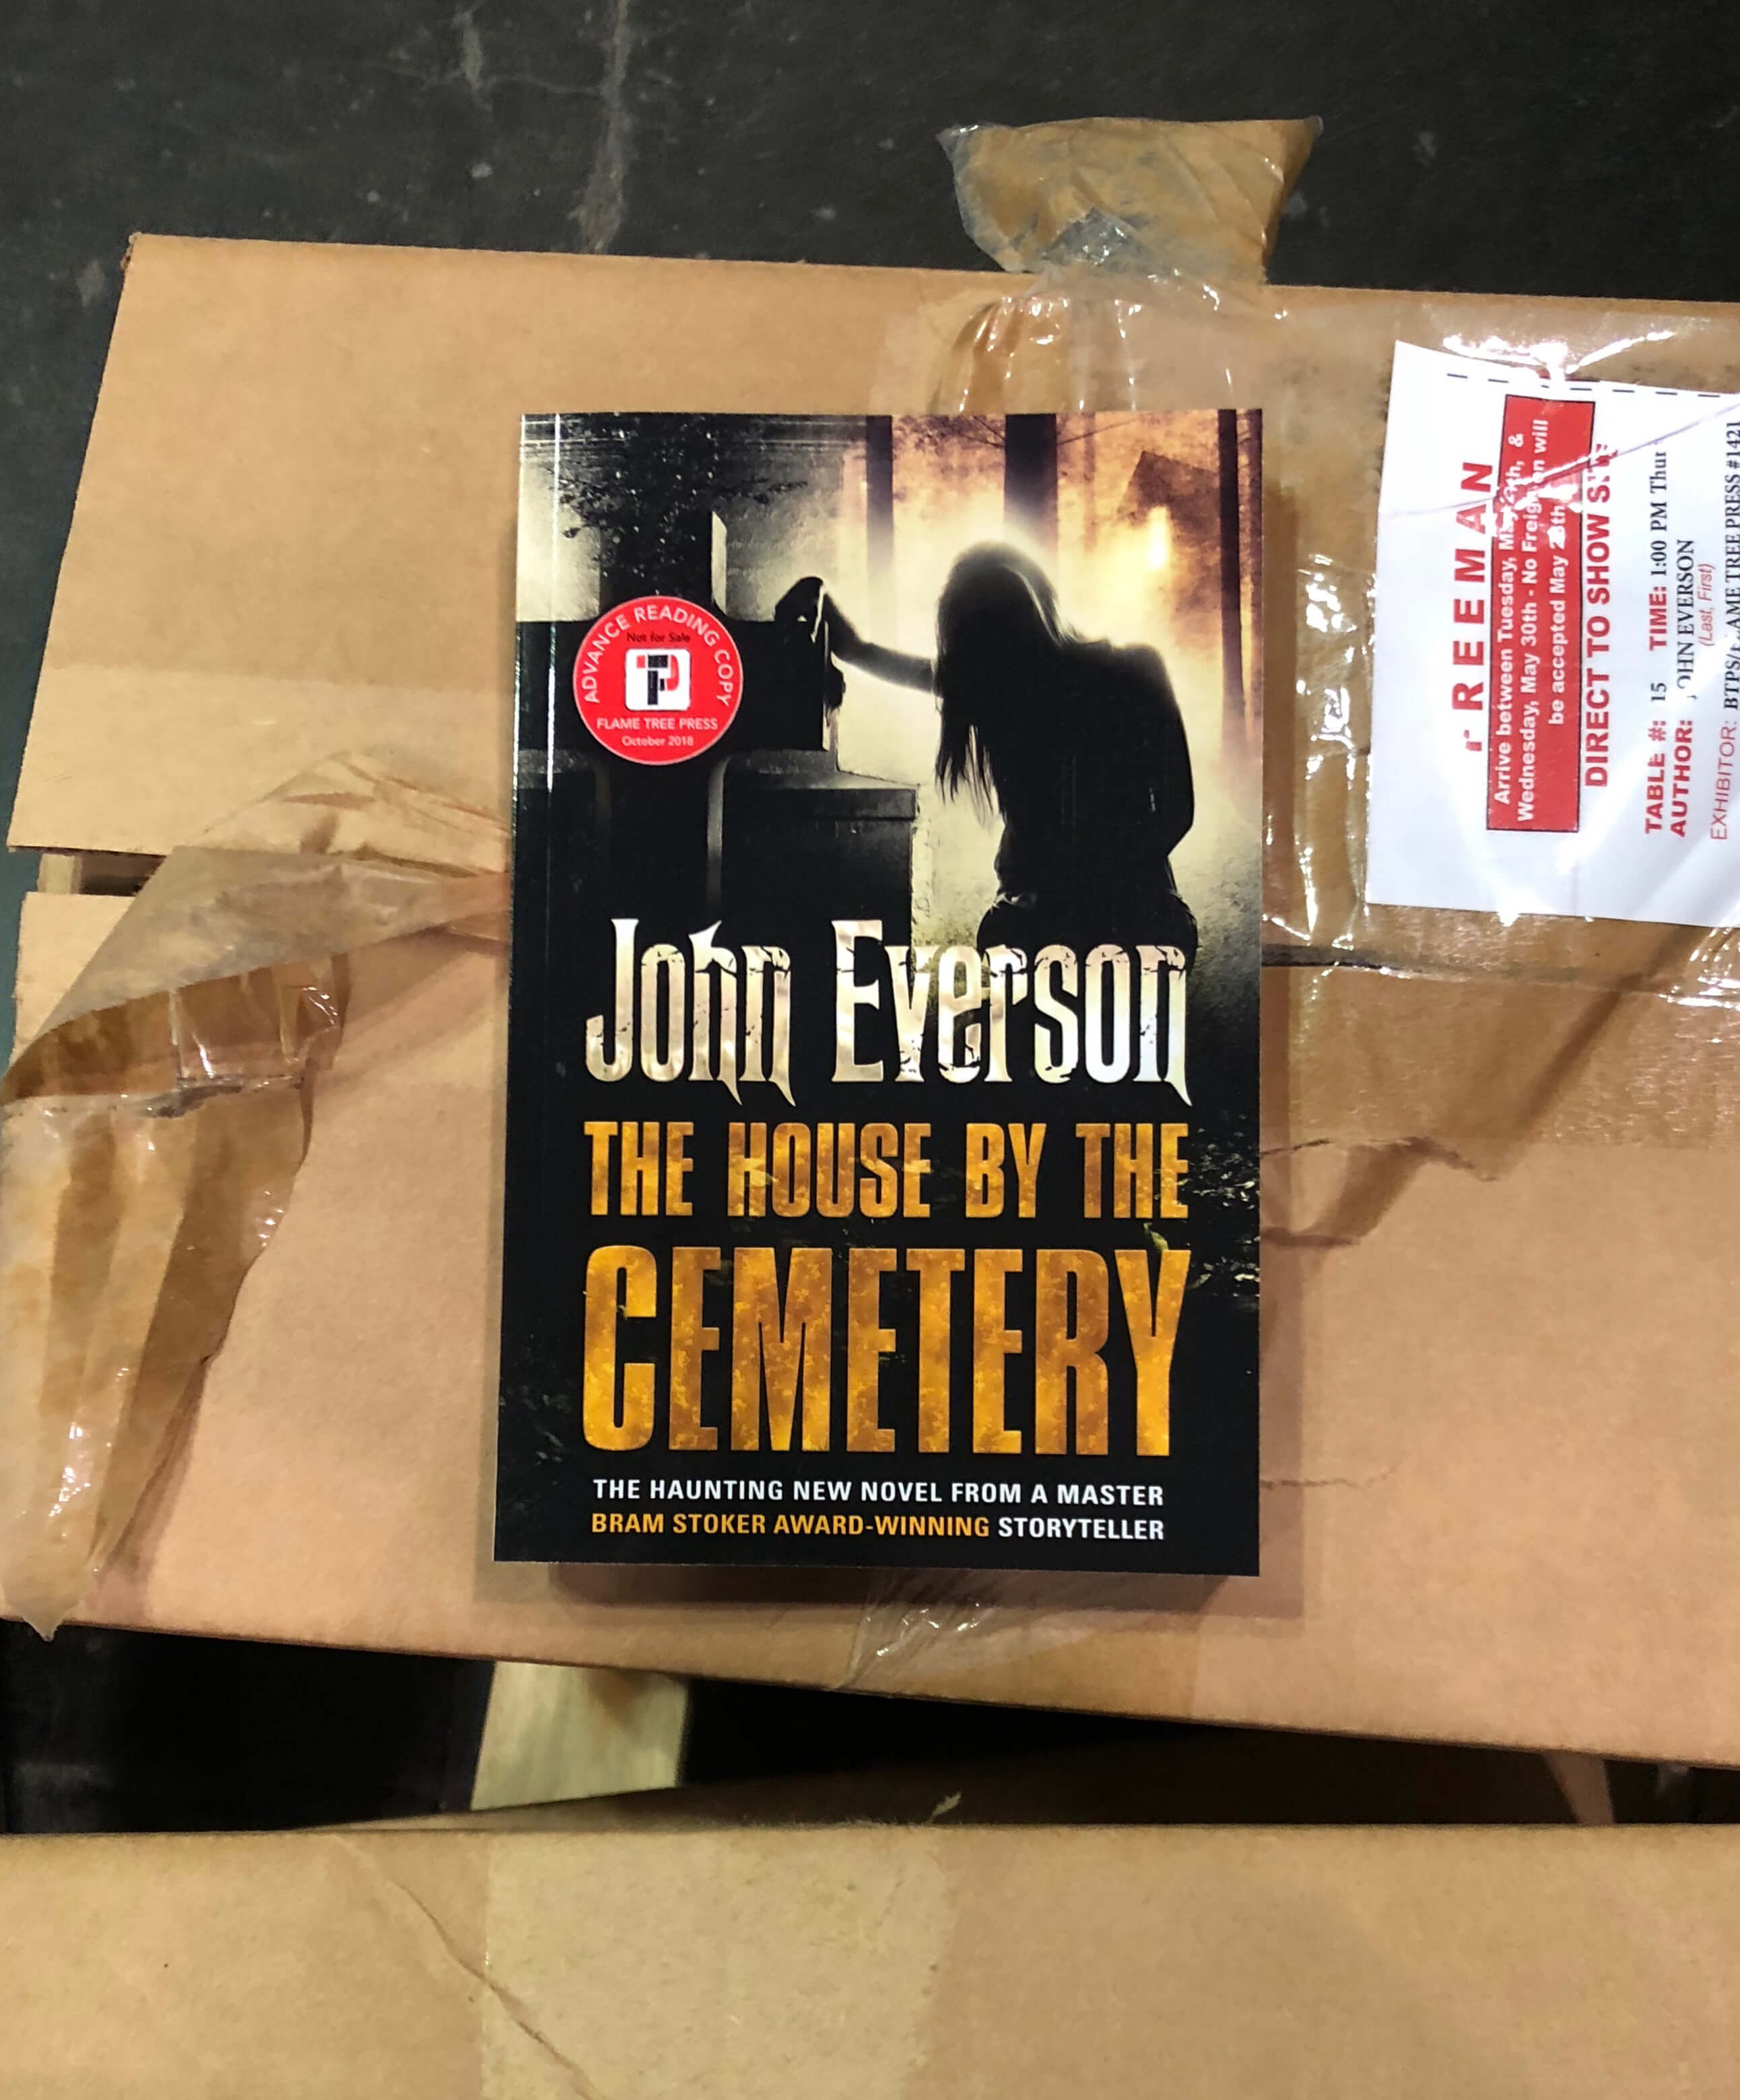 John Everson's The House by the Cemetery, Flame Tree Press